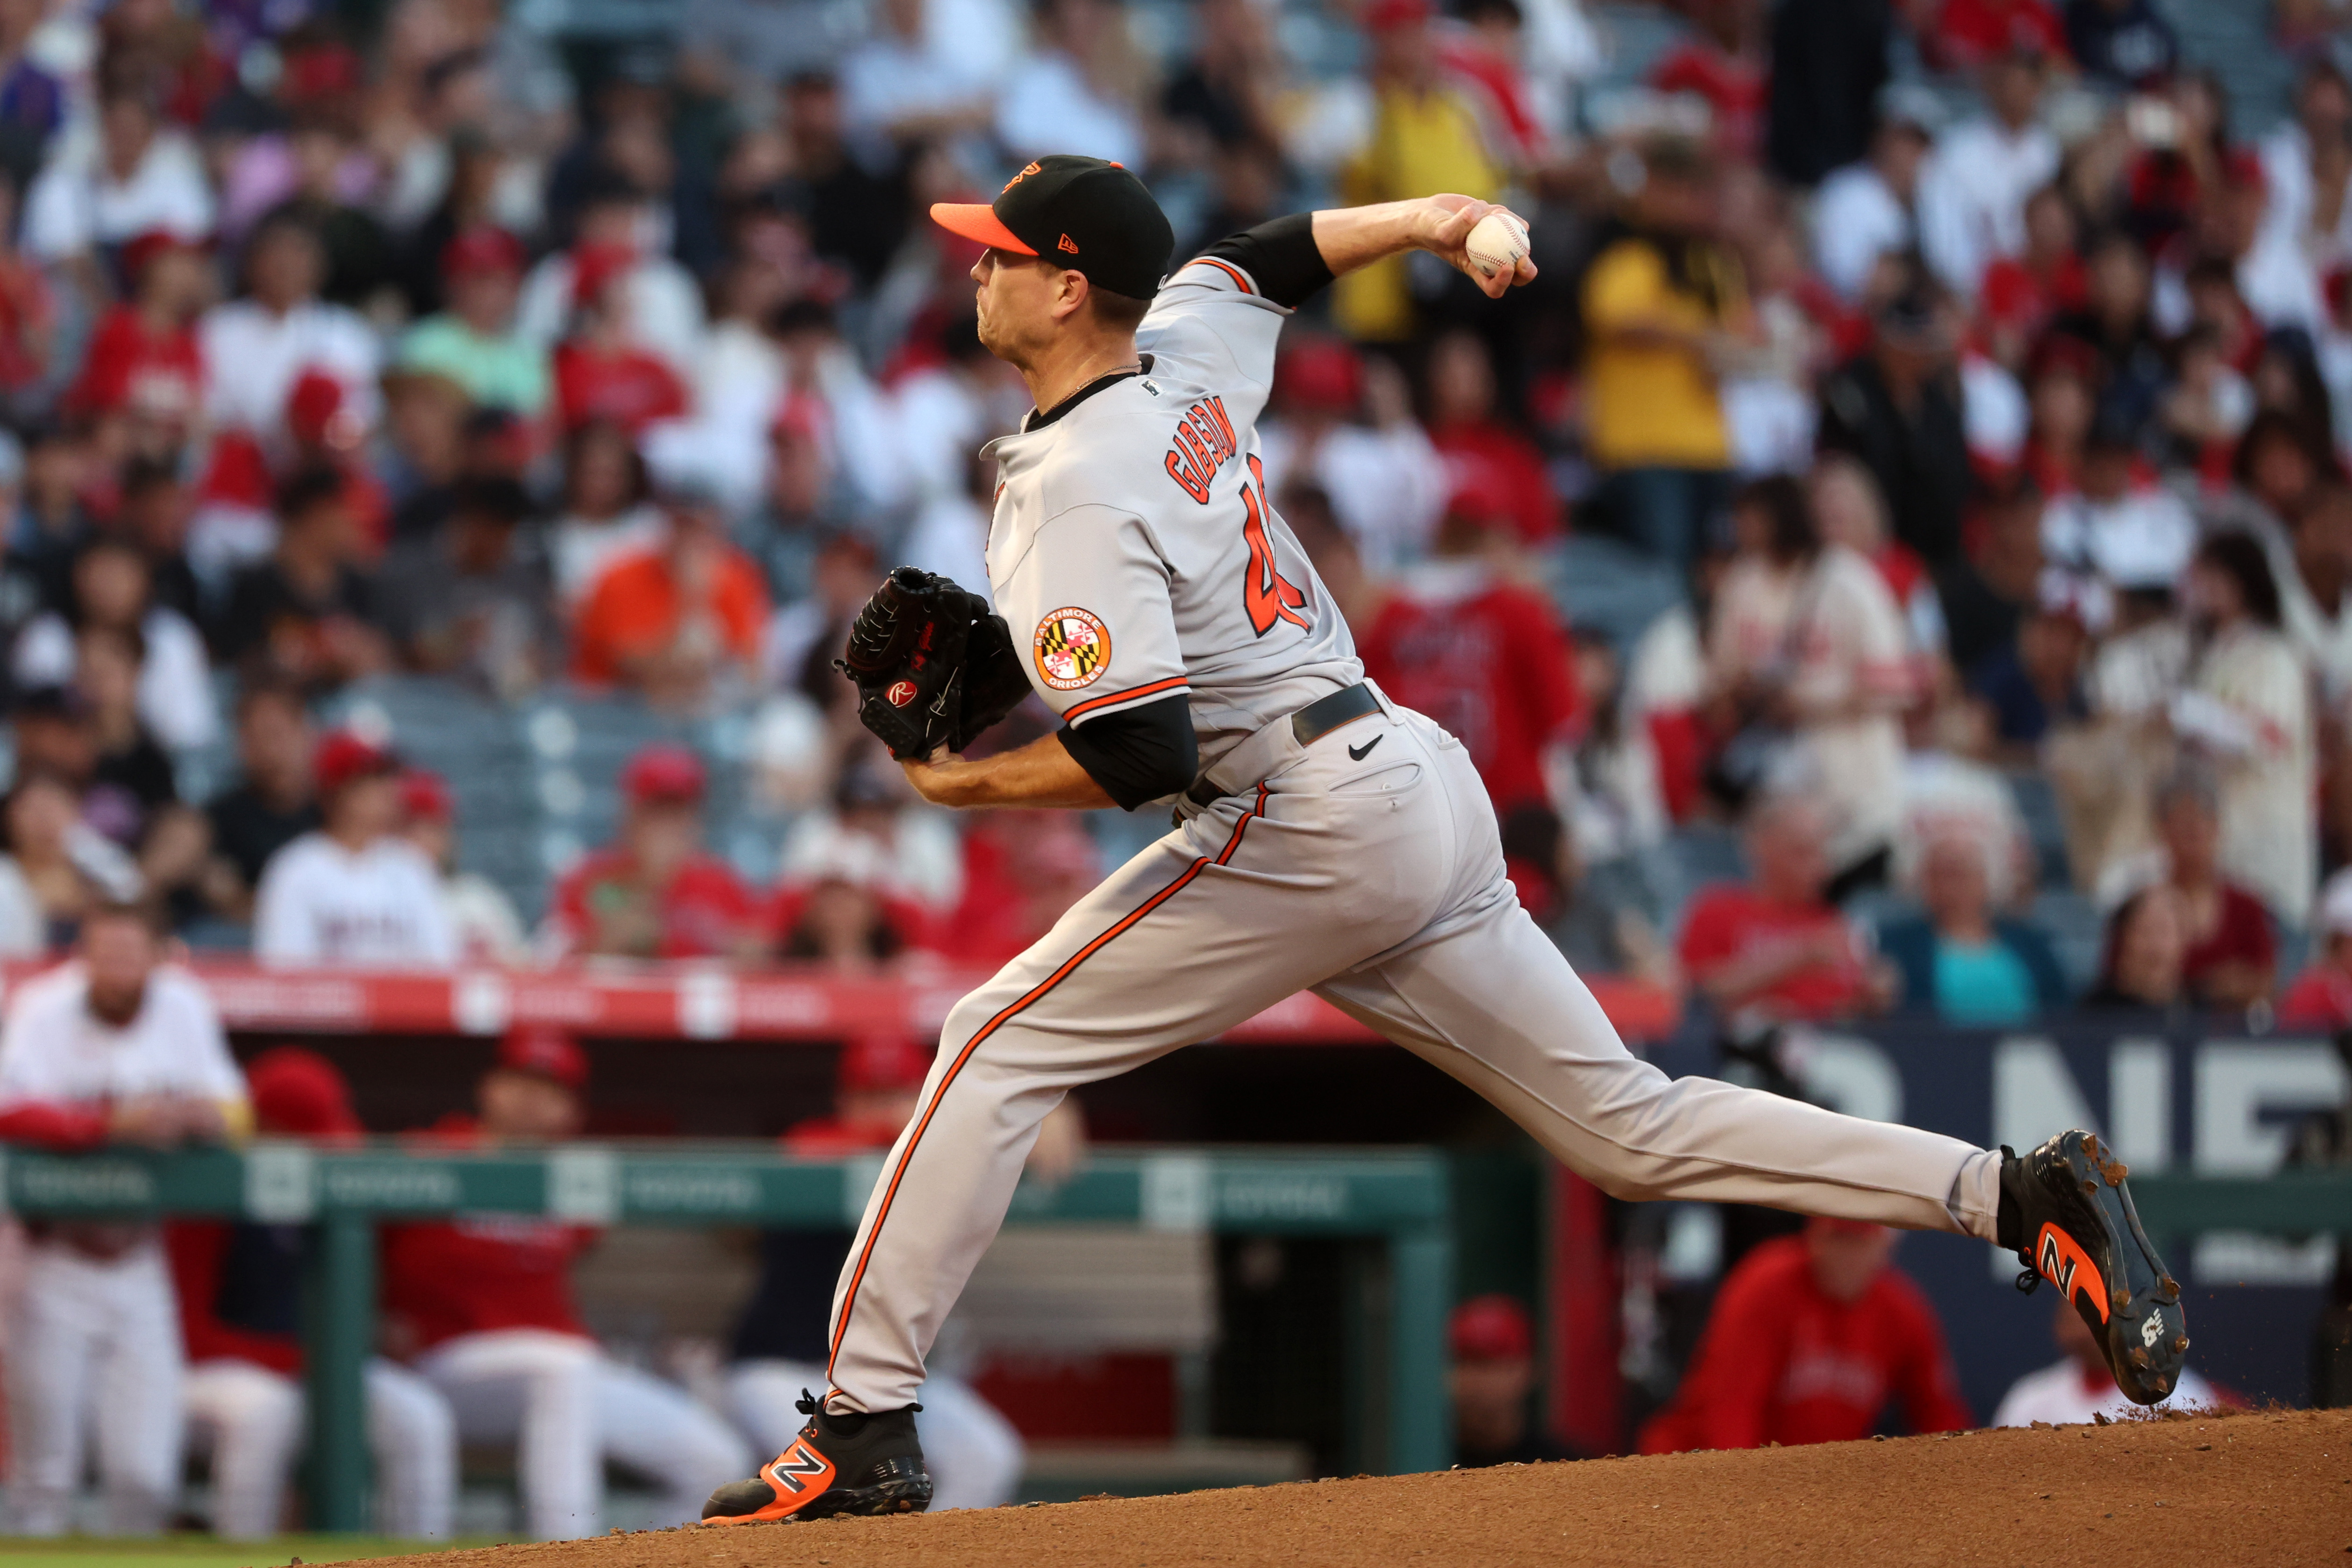 Austin Hays, Orioles overpower Angels, finish sweep